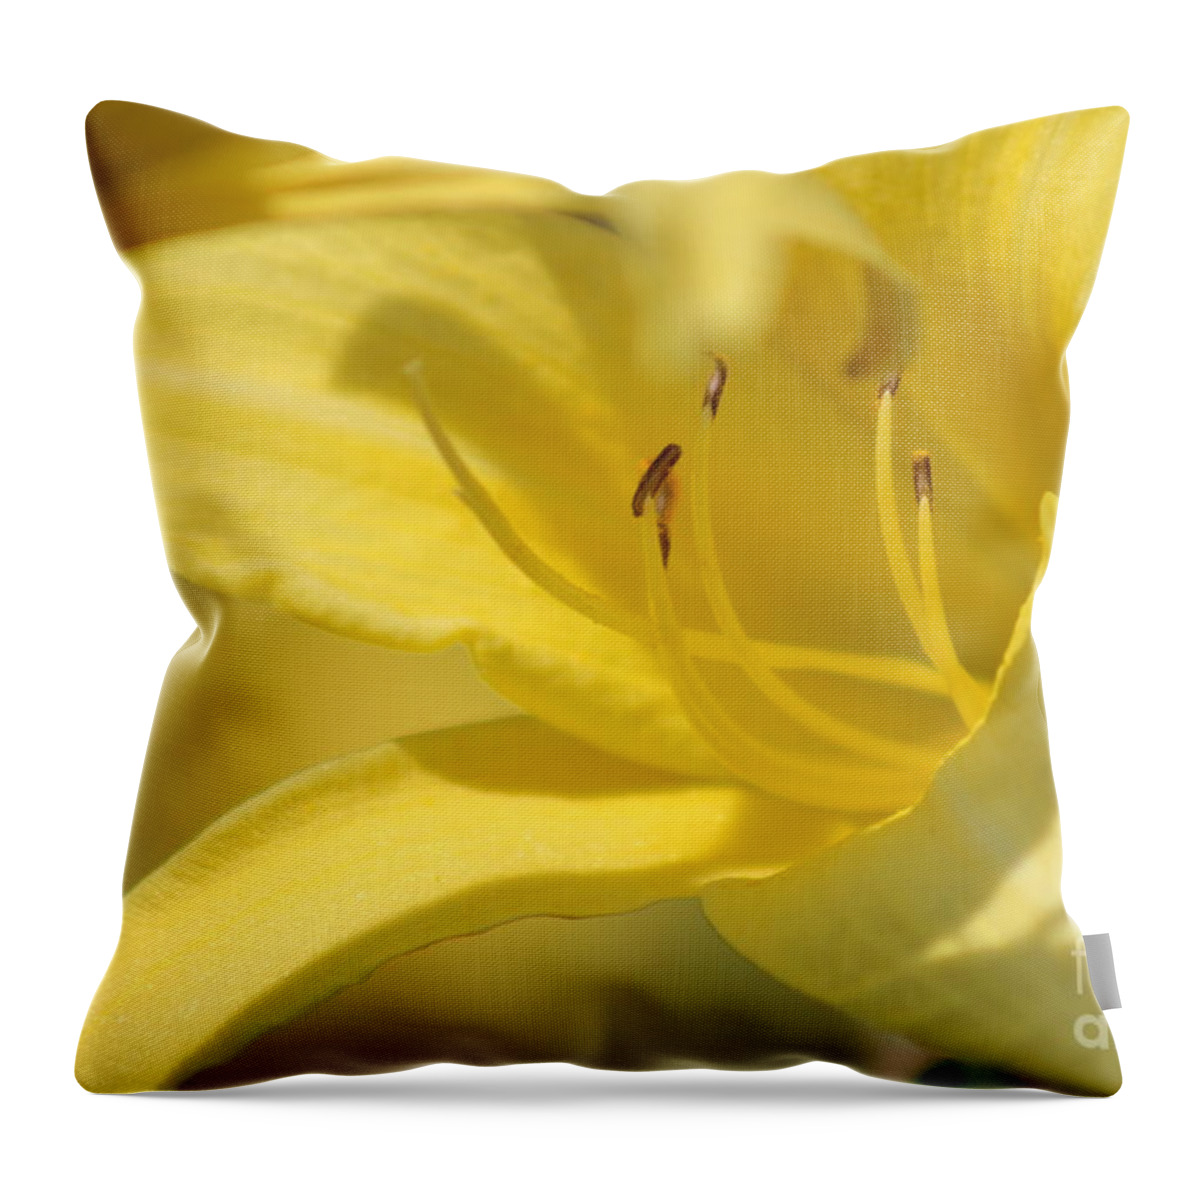 Yellow Throw Pillow featuring the photograph Nature's Beauty 49 by Deena Withycombe